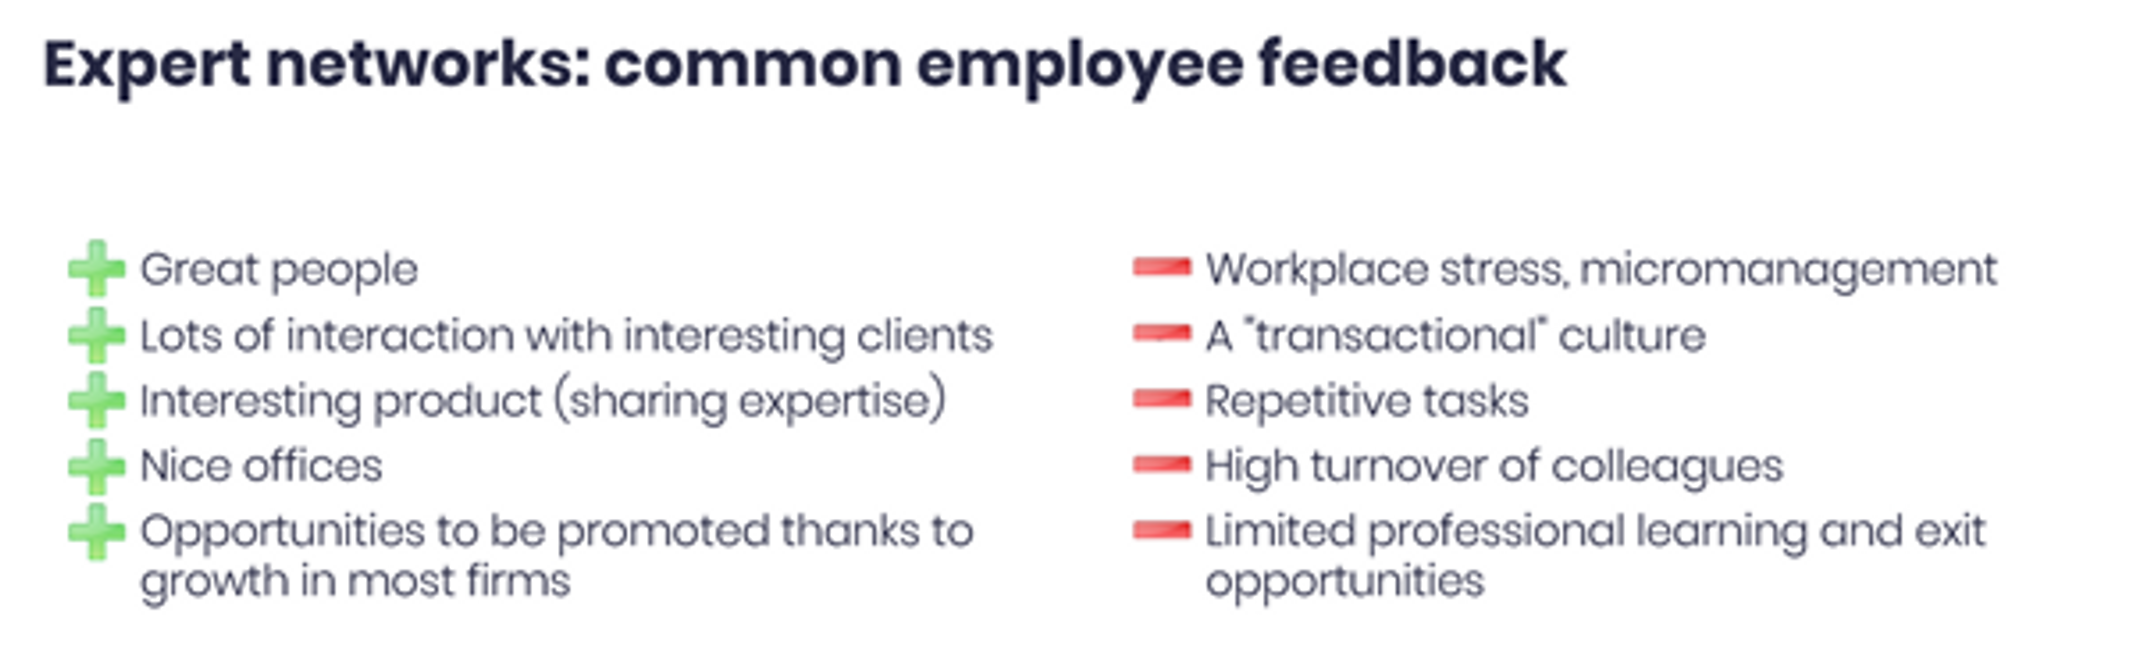 Common feedback from expert network employees